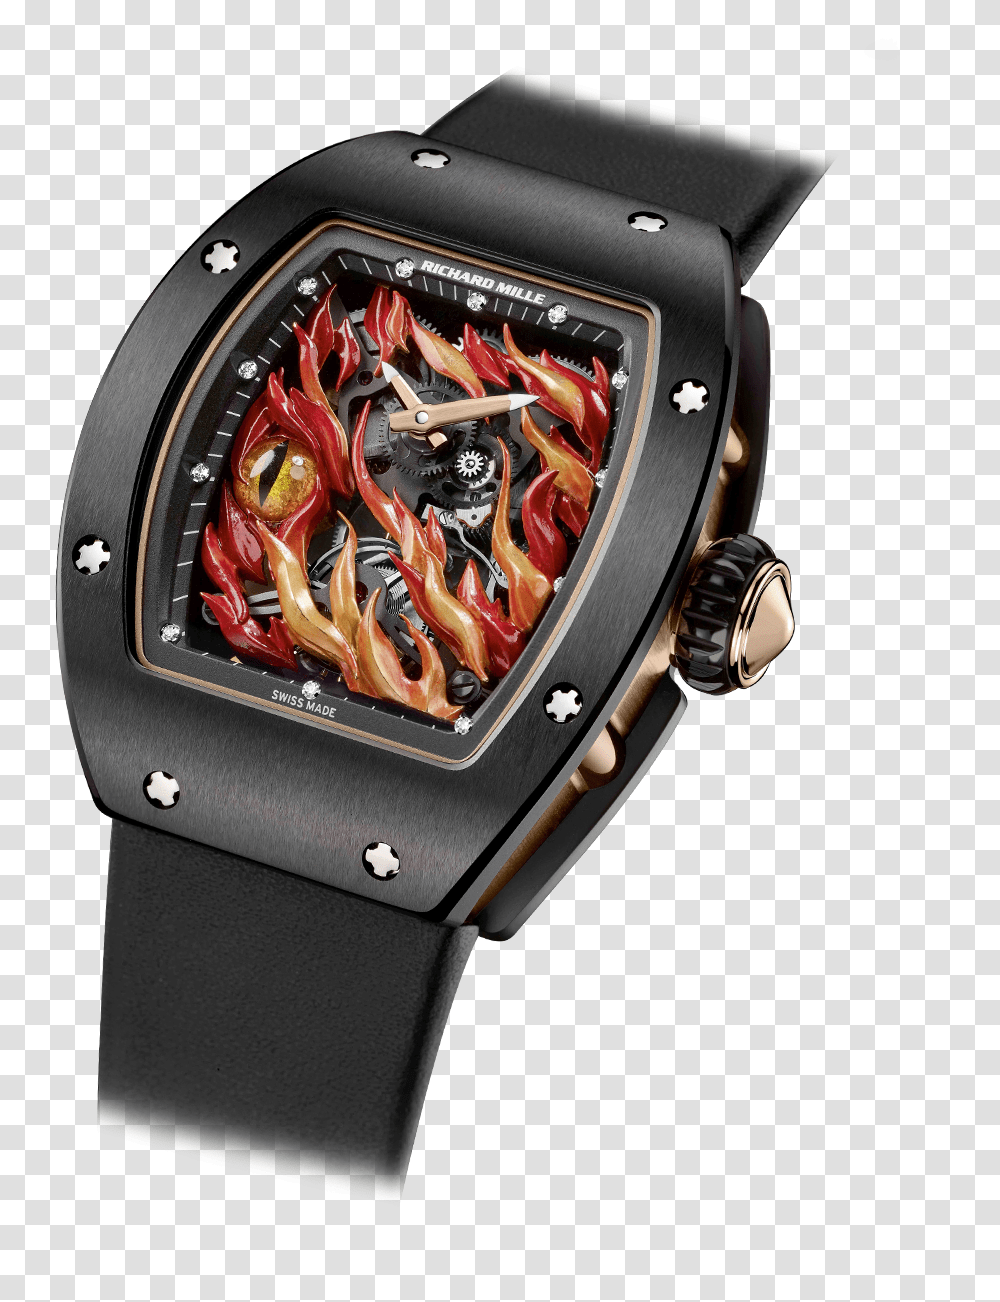 Download Hd Richard Mille Ed Sheeran Richard Mille Red Fire, Wristwatch, Machine, Rotor, Coil Transparent Png